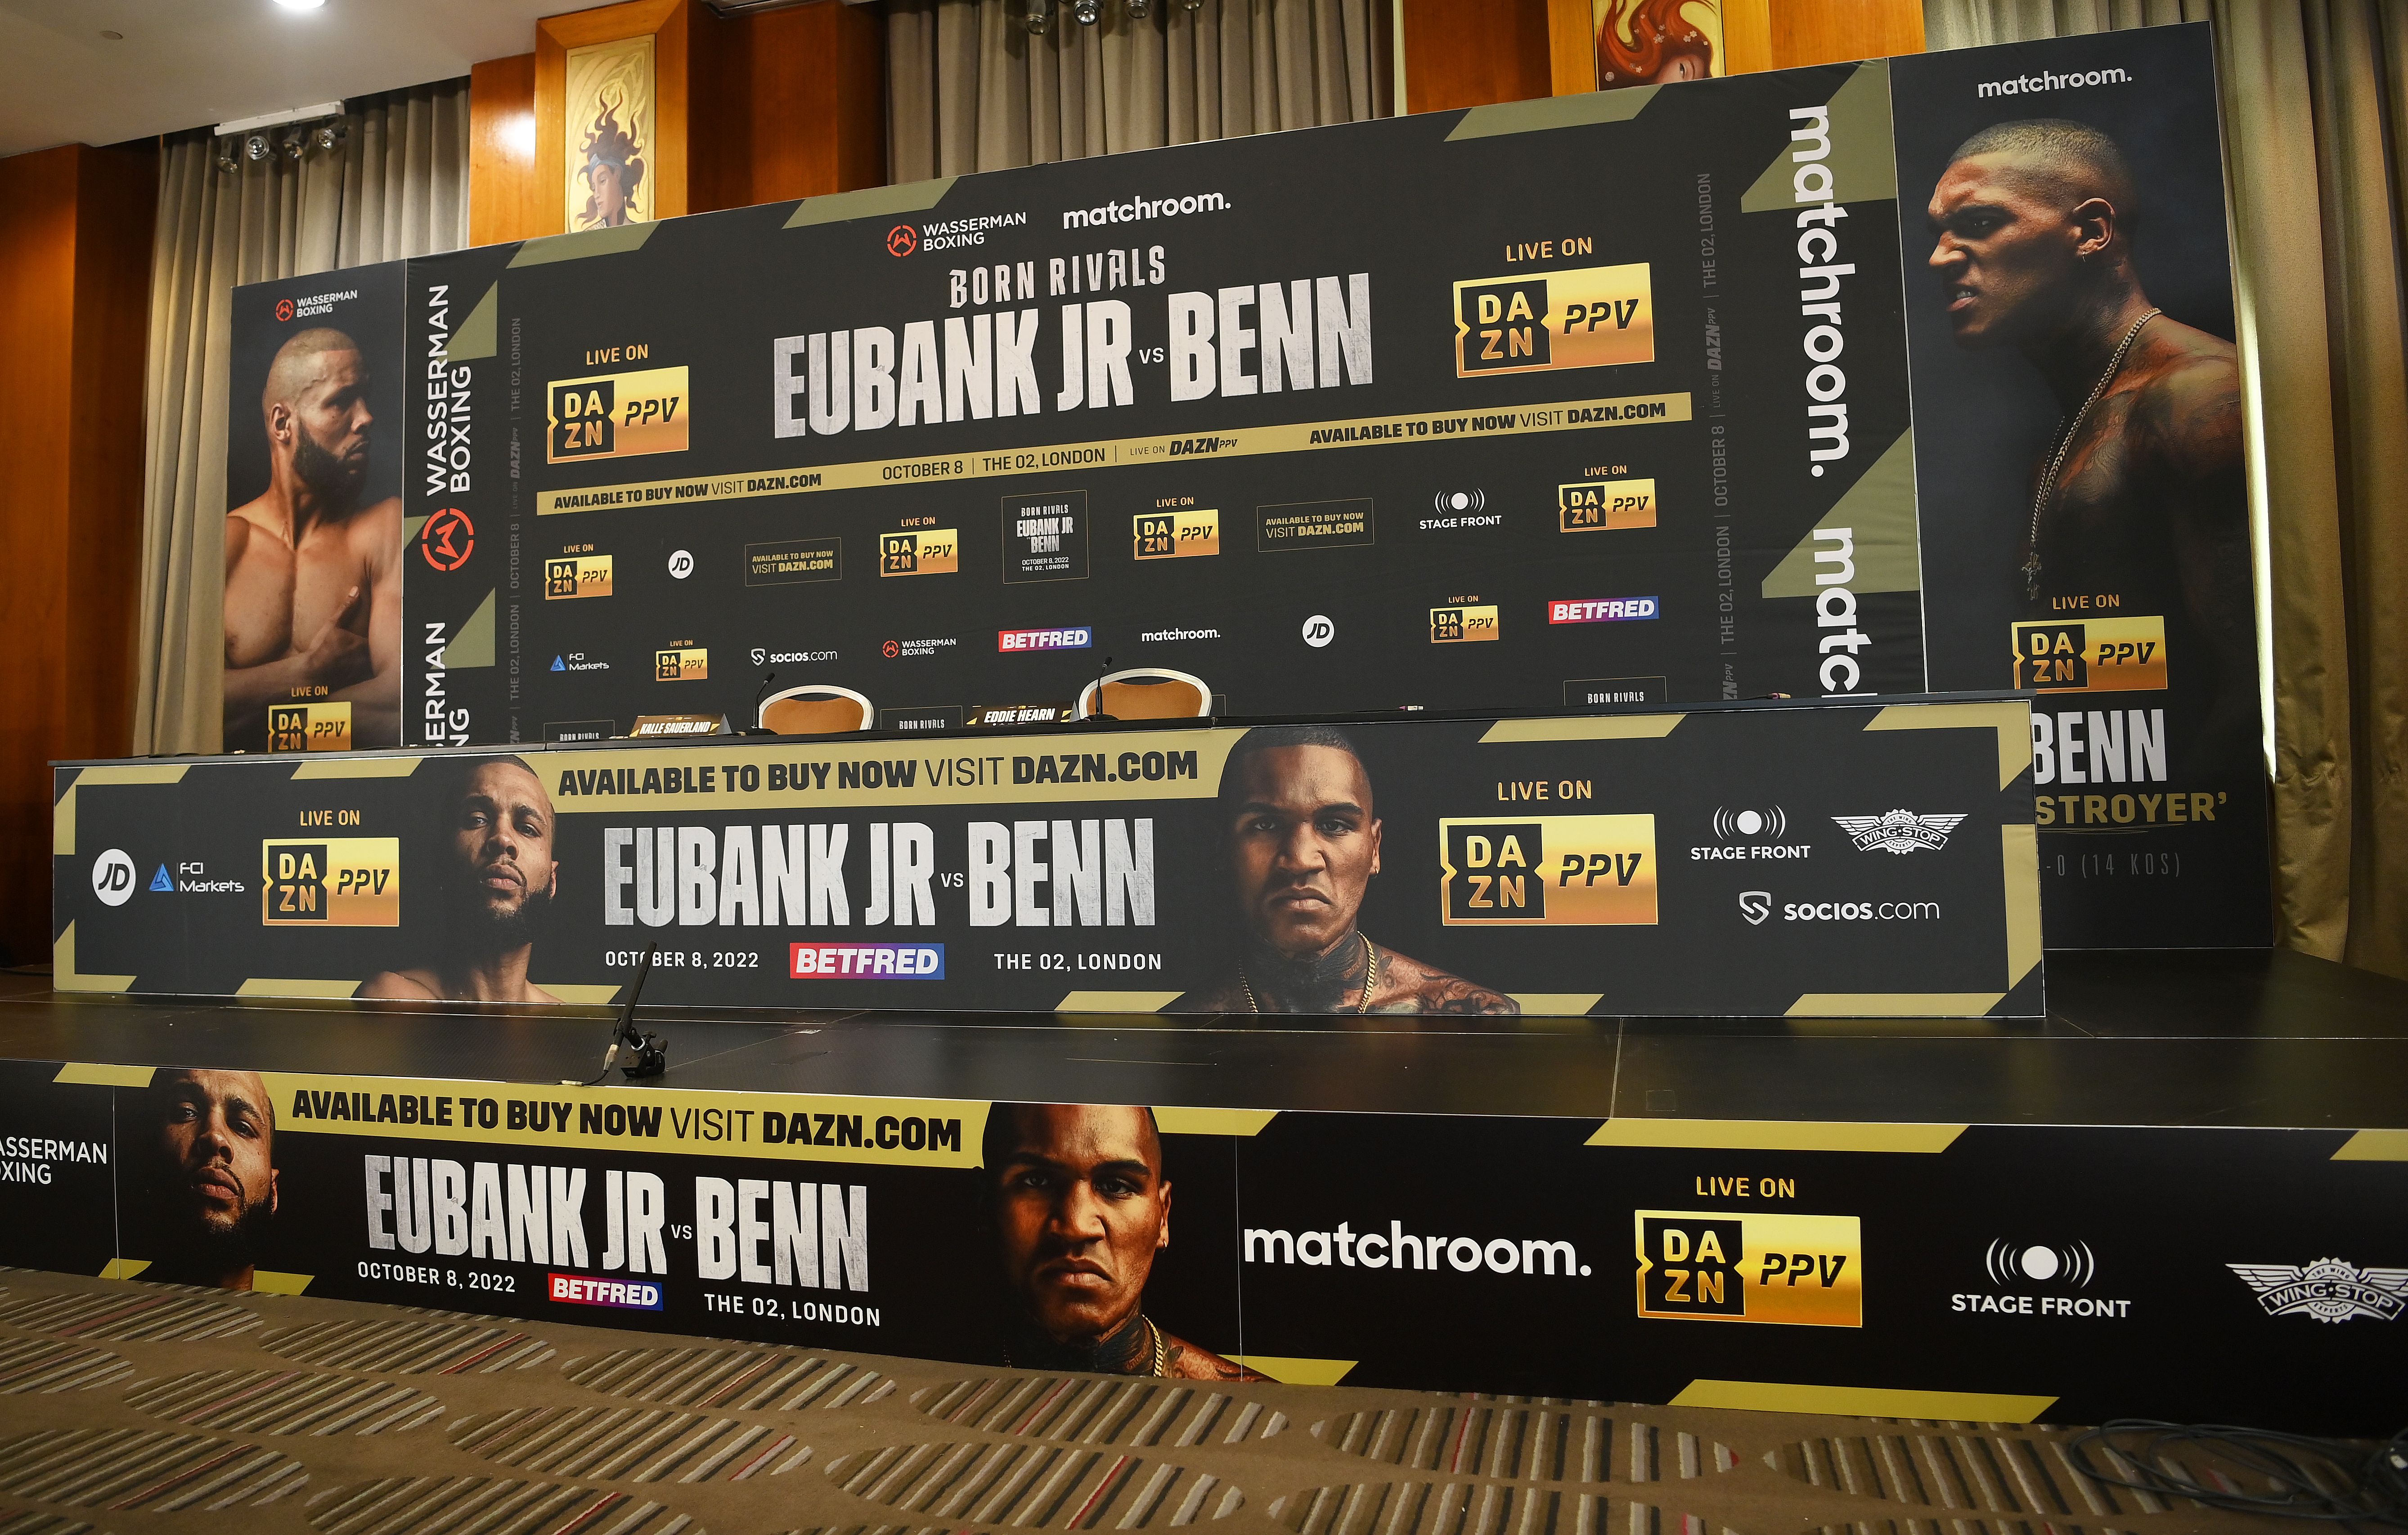 Conor Benn's fight with Chris Eubank Jr was cancelled after a failed drugs test